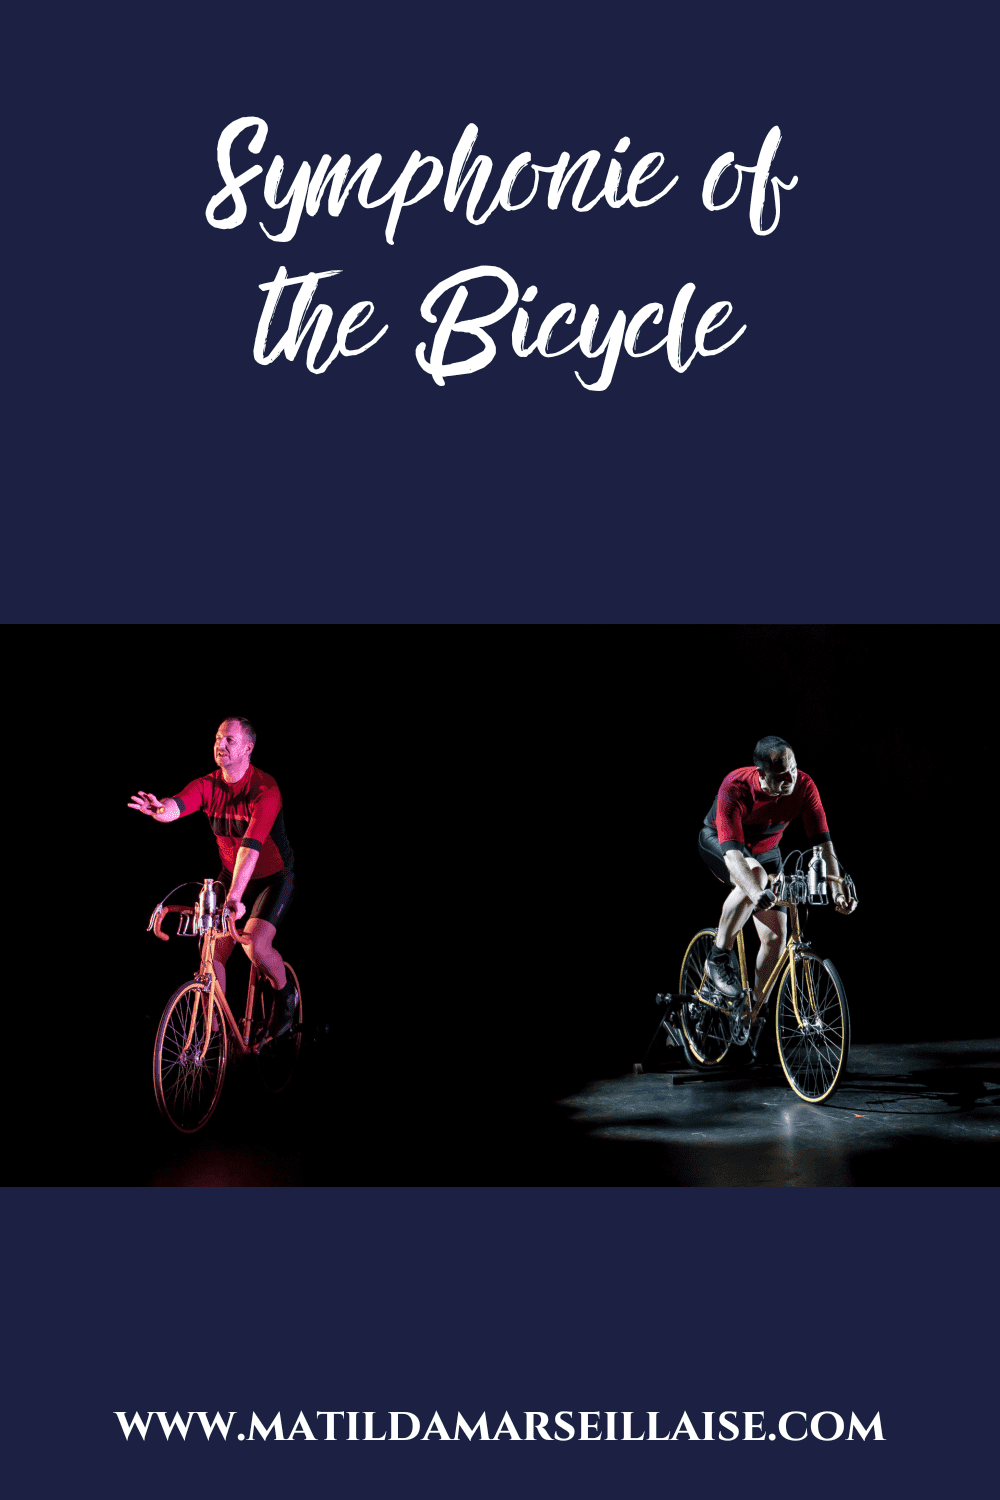 Symphonie of the Bicycle